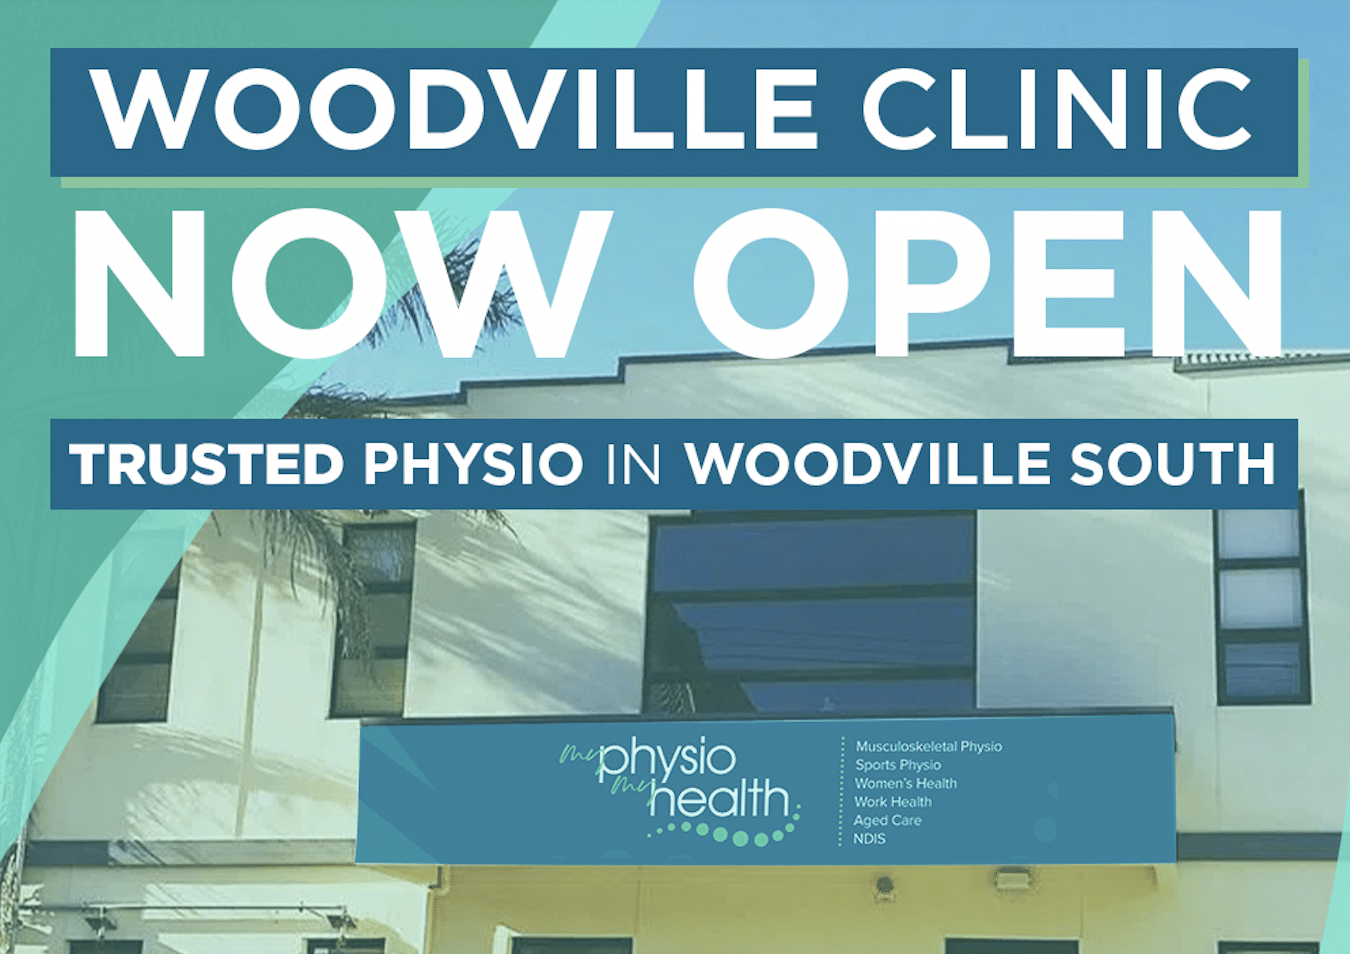 Younique Health and Wellness has re-branded as My Physio My Health Woodville